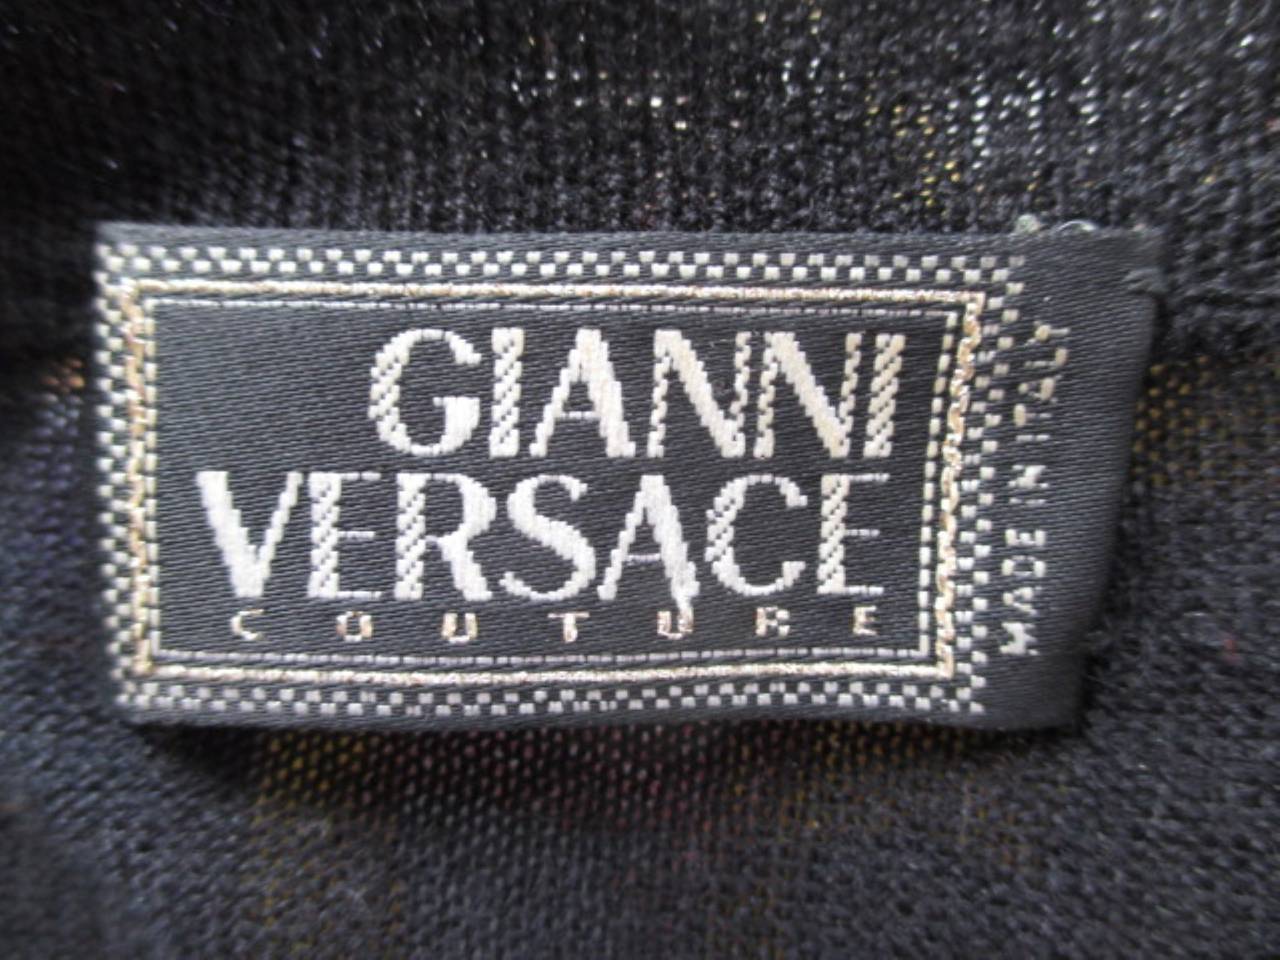 Couture Gianni Versace black sweater is a blend of cashmere, wool and silk with a diamante button (slight damage).
The sweater has detachable shoulderpads.

Size marked 42/11 fits like a eu 40/42 or US 10/12